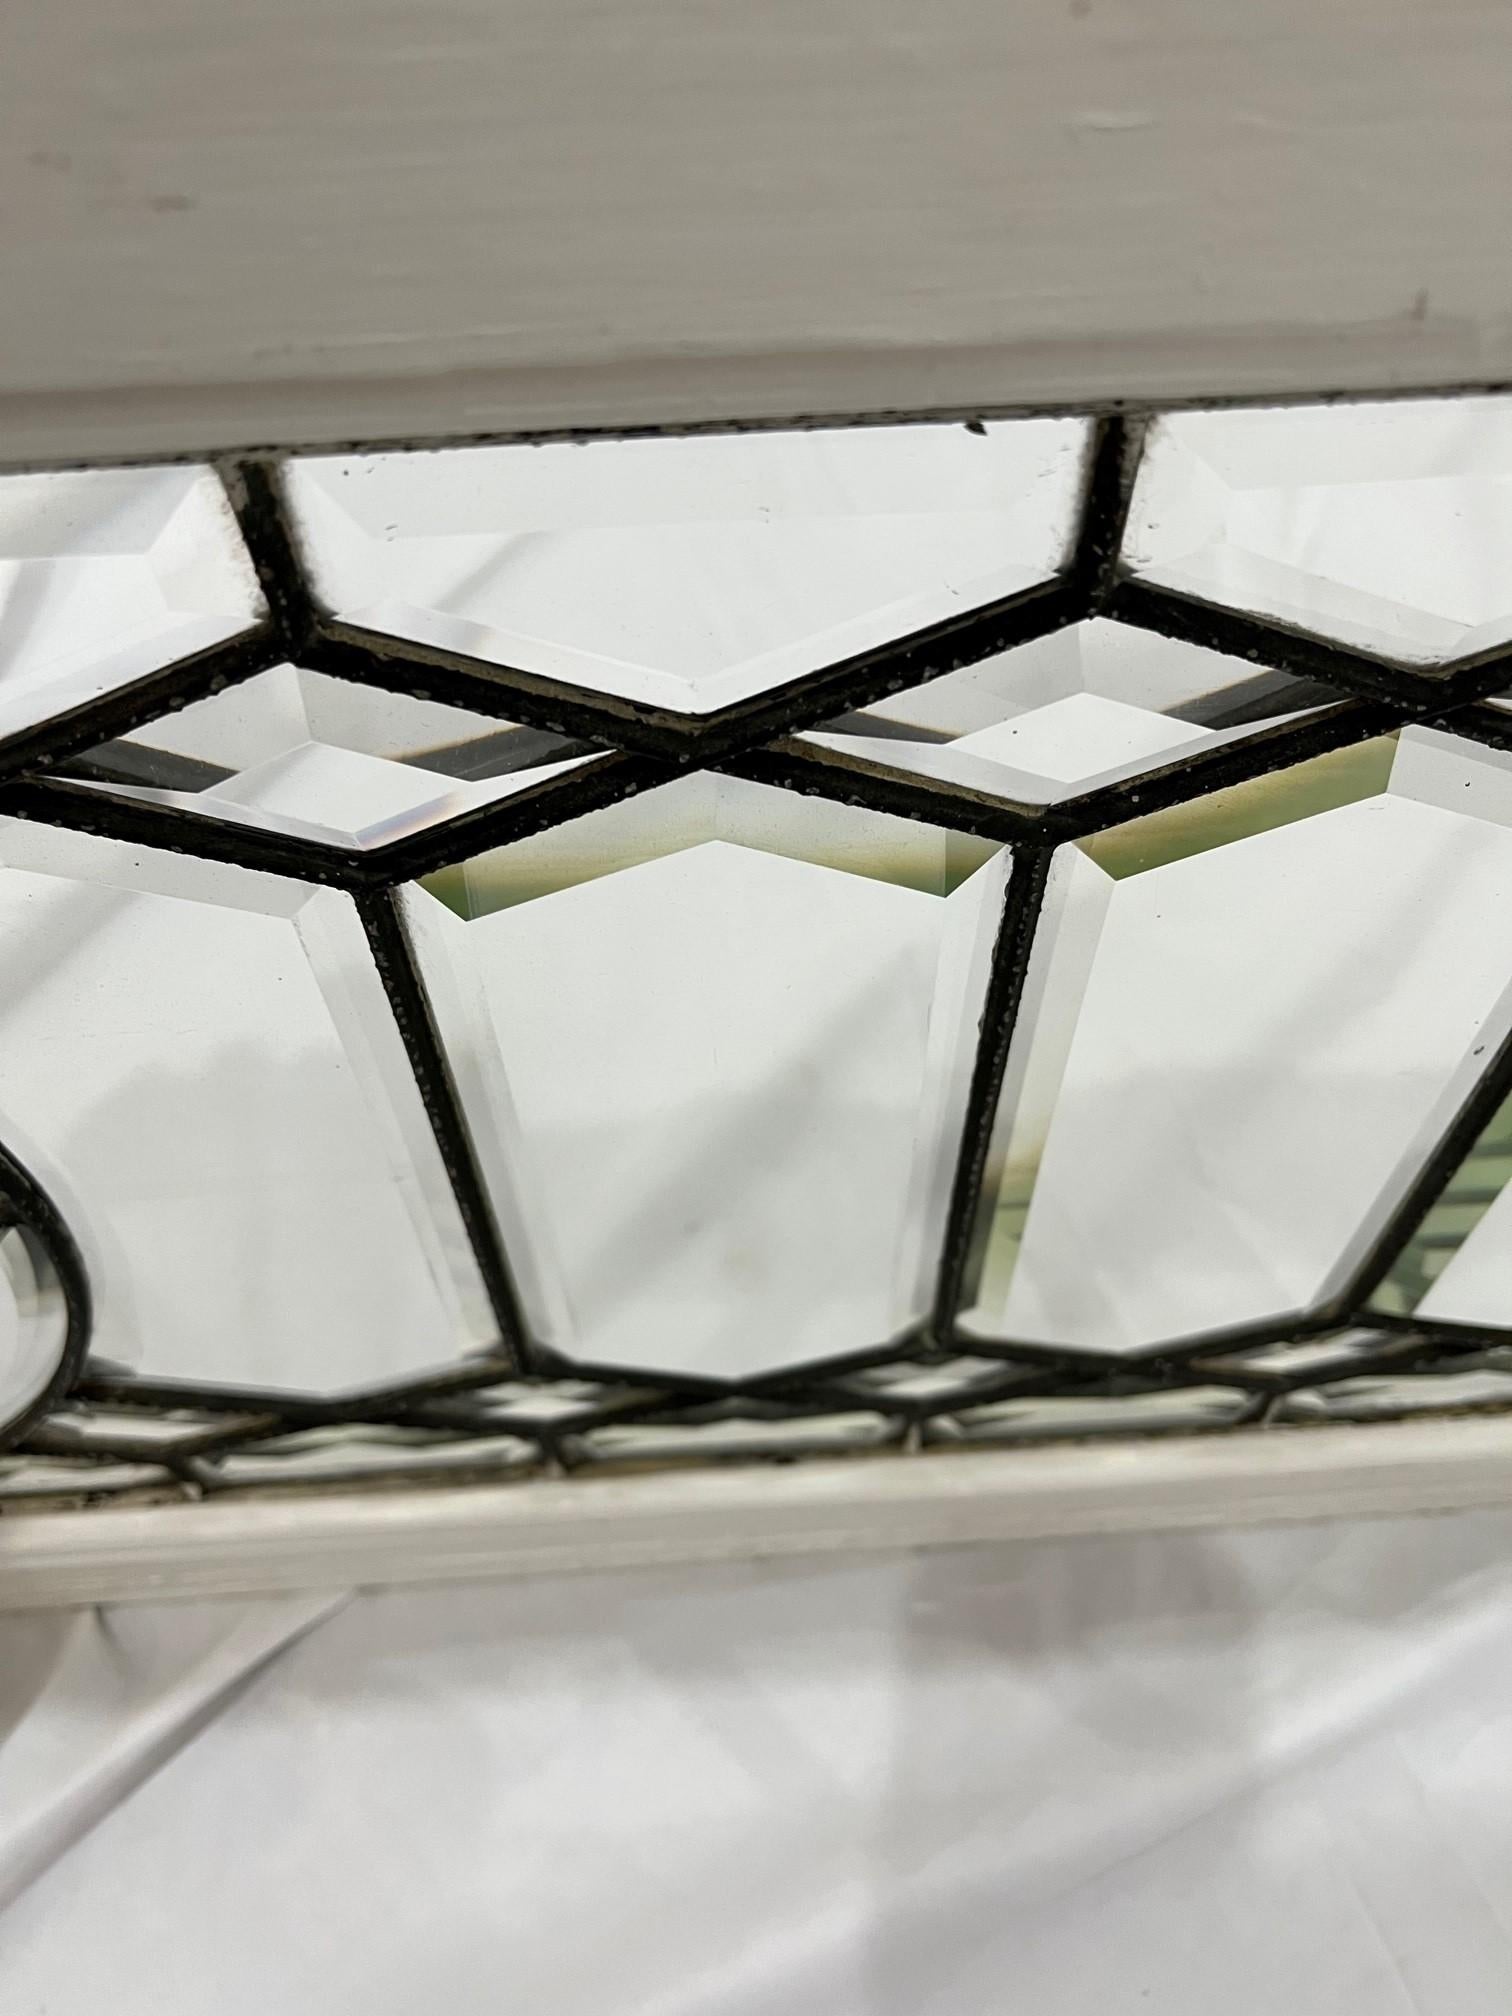 Early 20th Century Antique Beveled Glass Transom Window in a Wood Frame For Sale 3